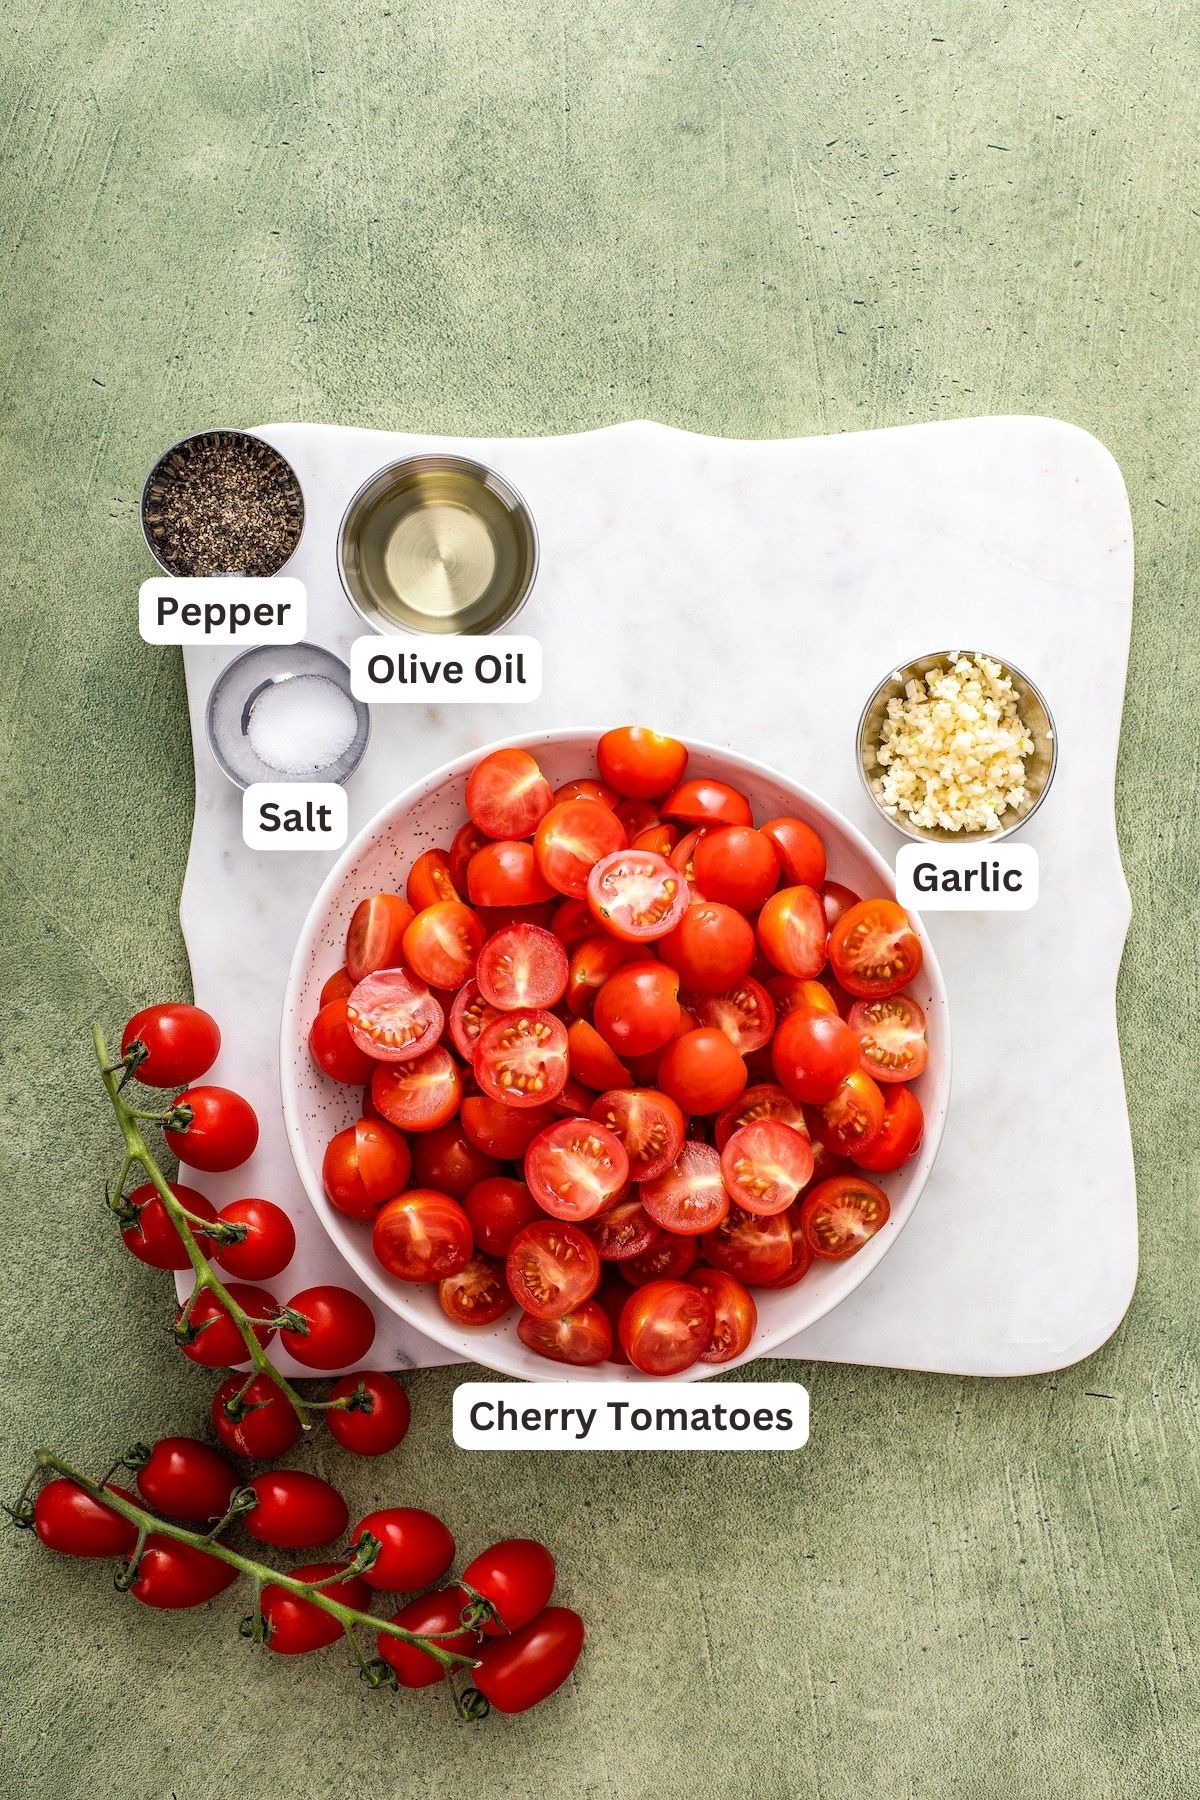 Ingredients for Garlic Roasted Cherry Tomatoes.